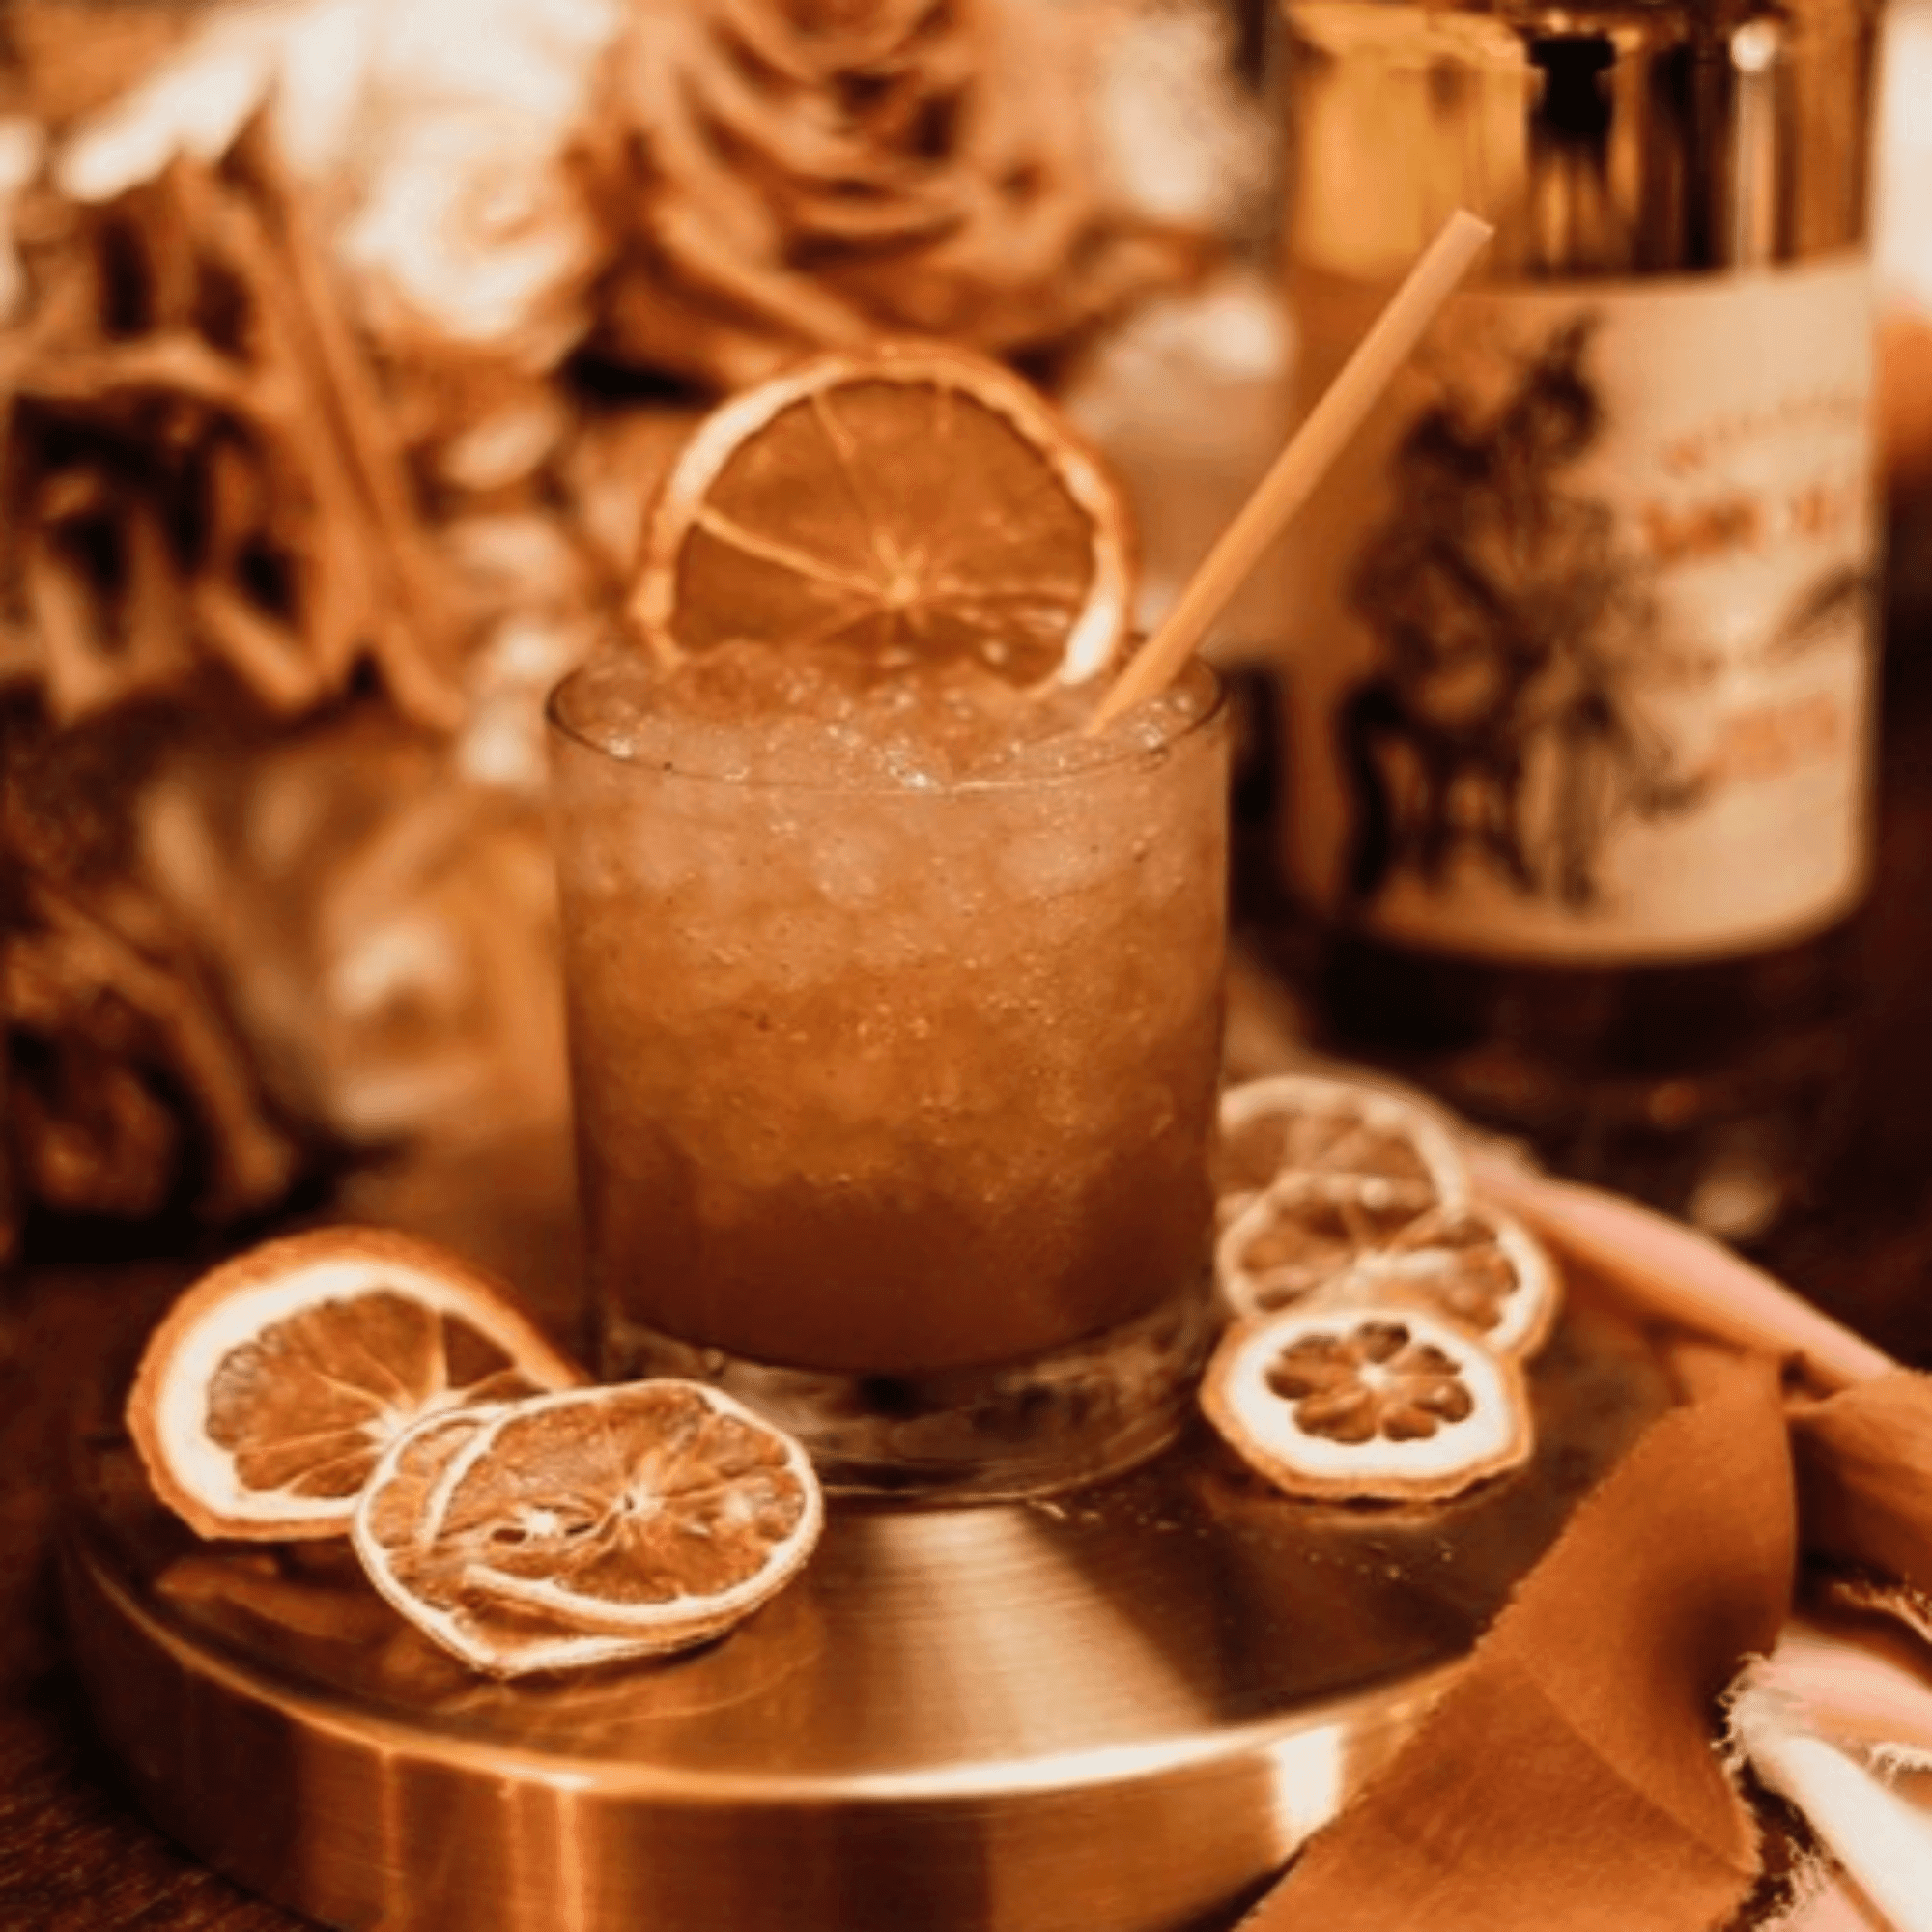 Vintage Citrus Cocktail accompanied with wheat straw